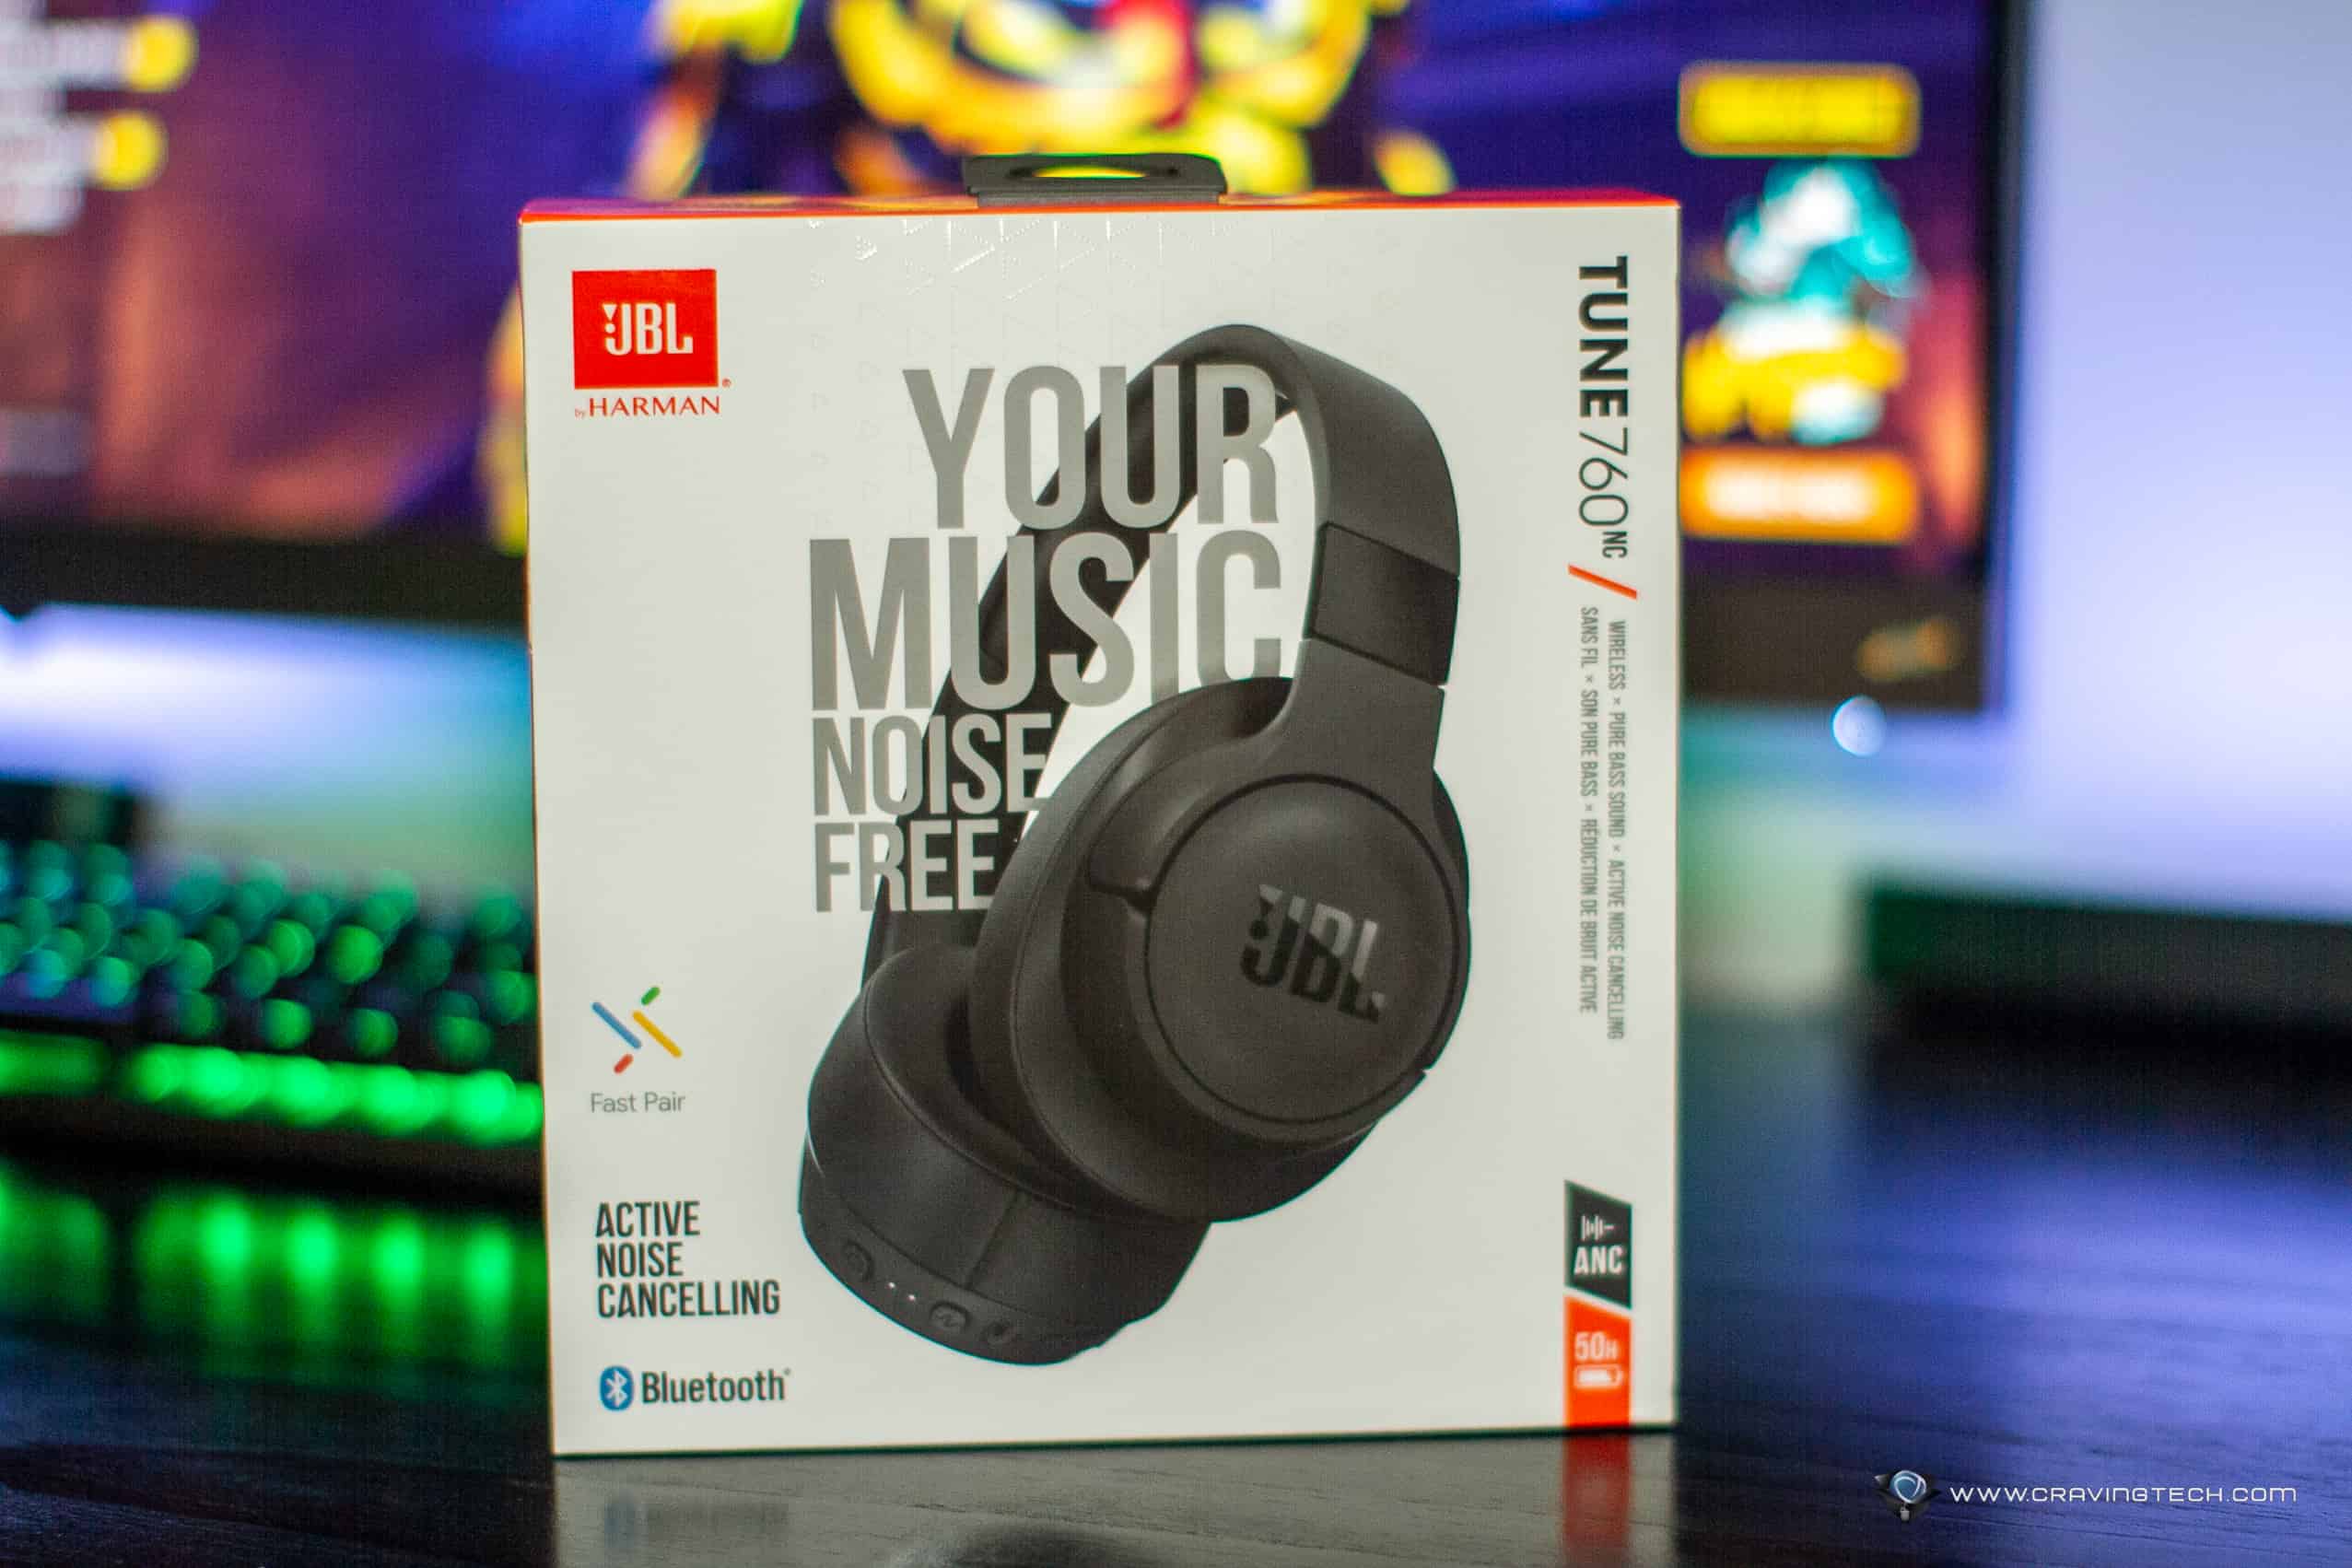 JBL Tune 500 Headphones - Unboxing or Review 